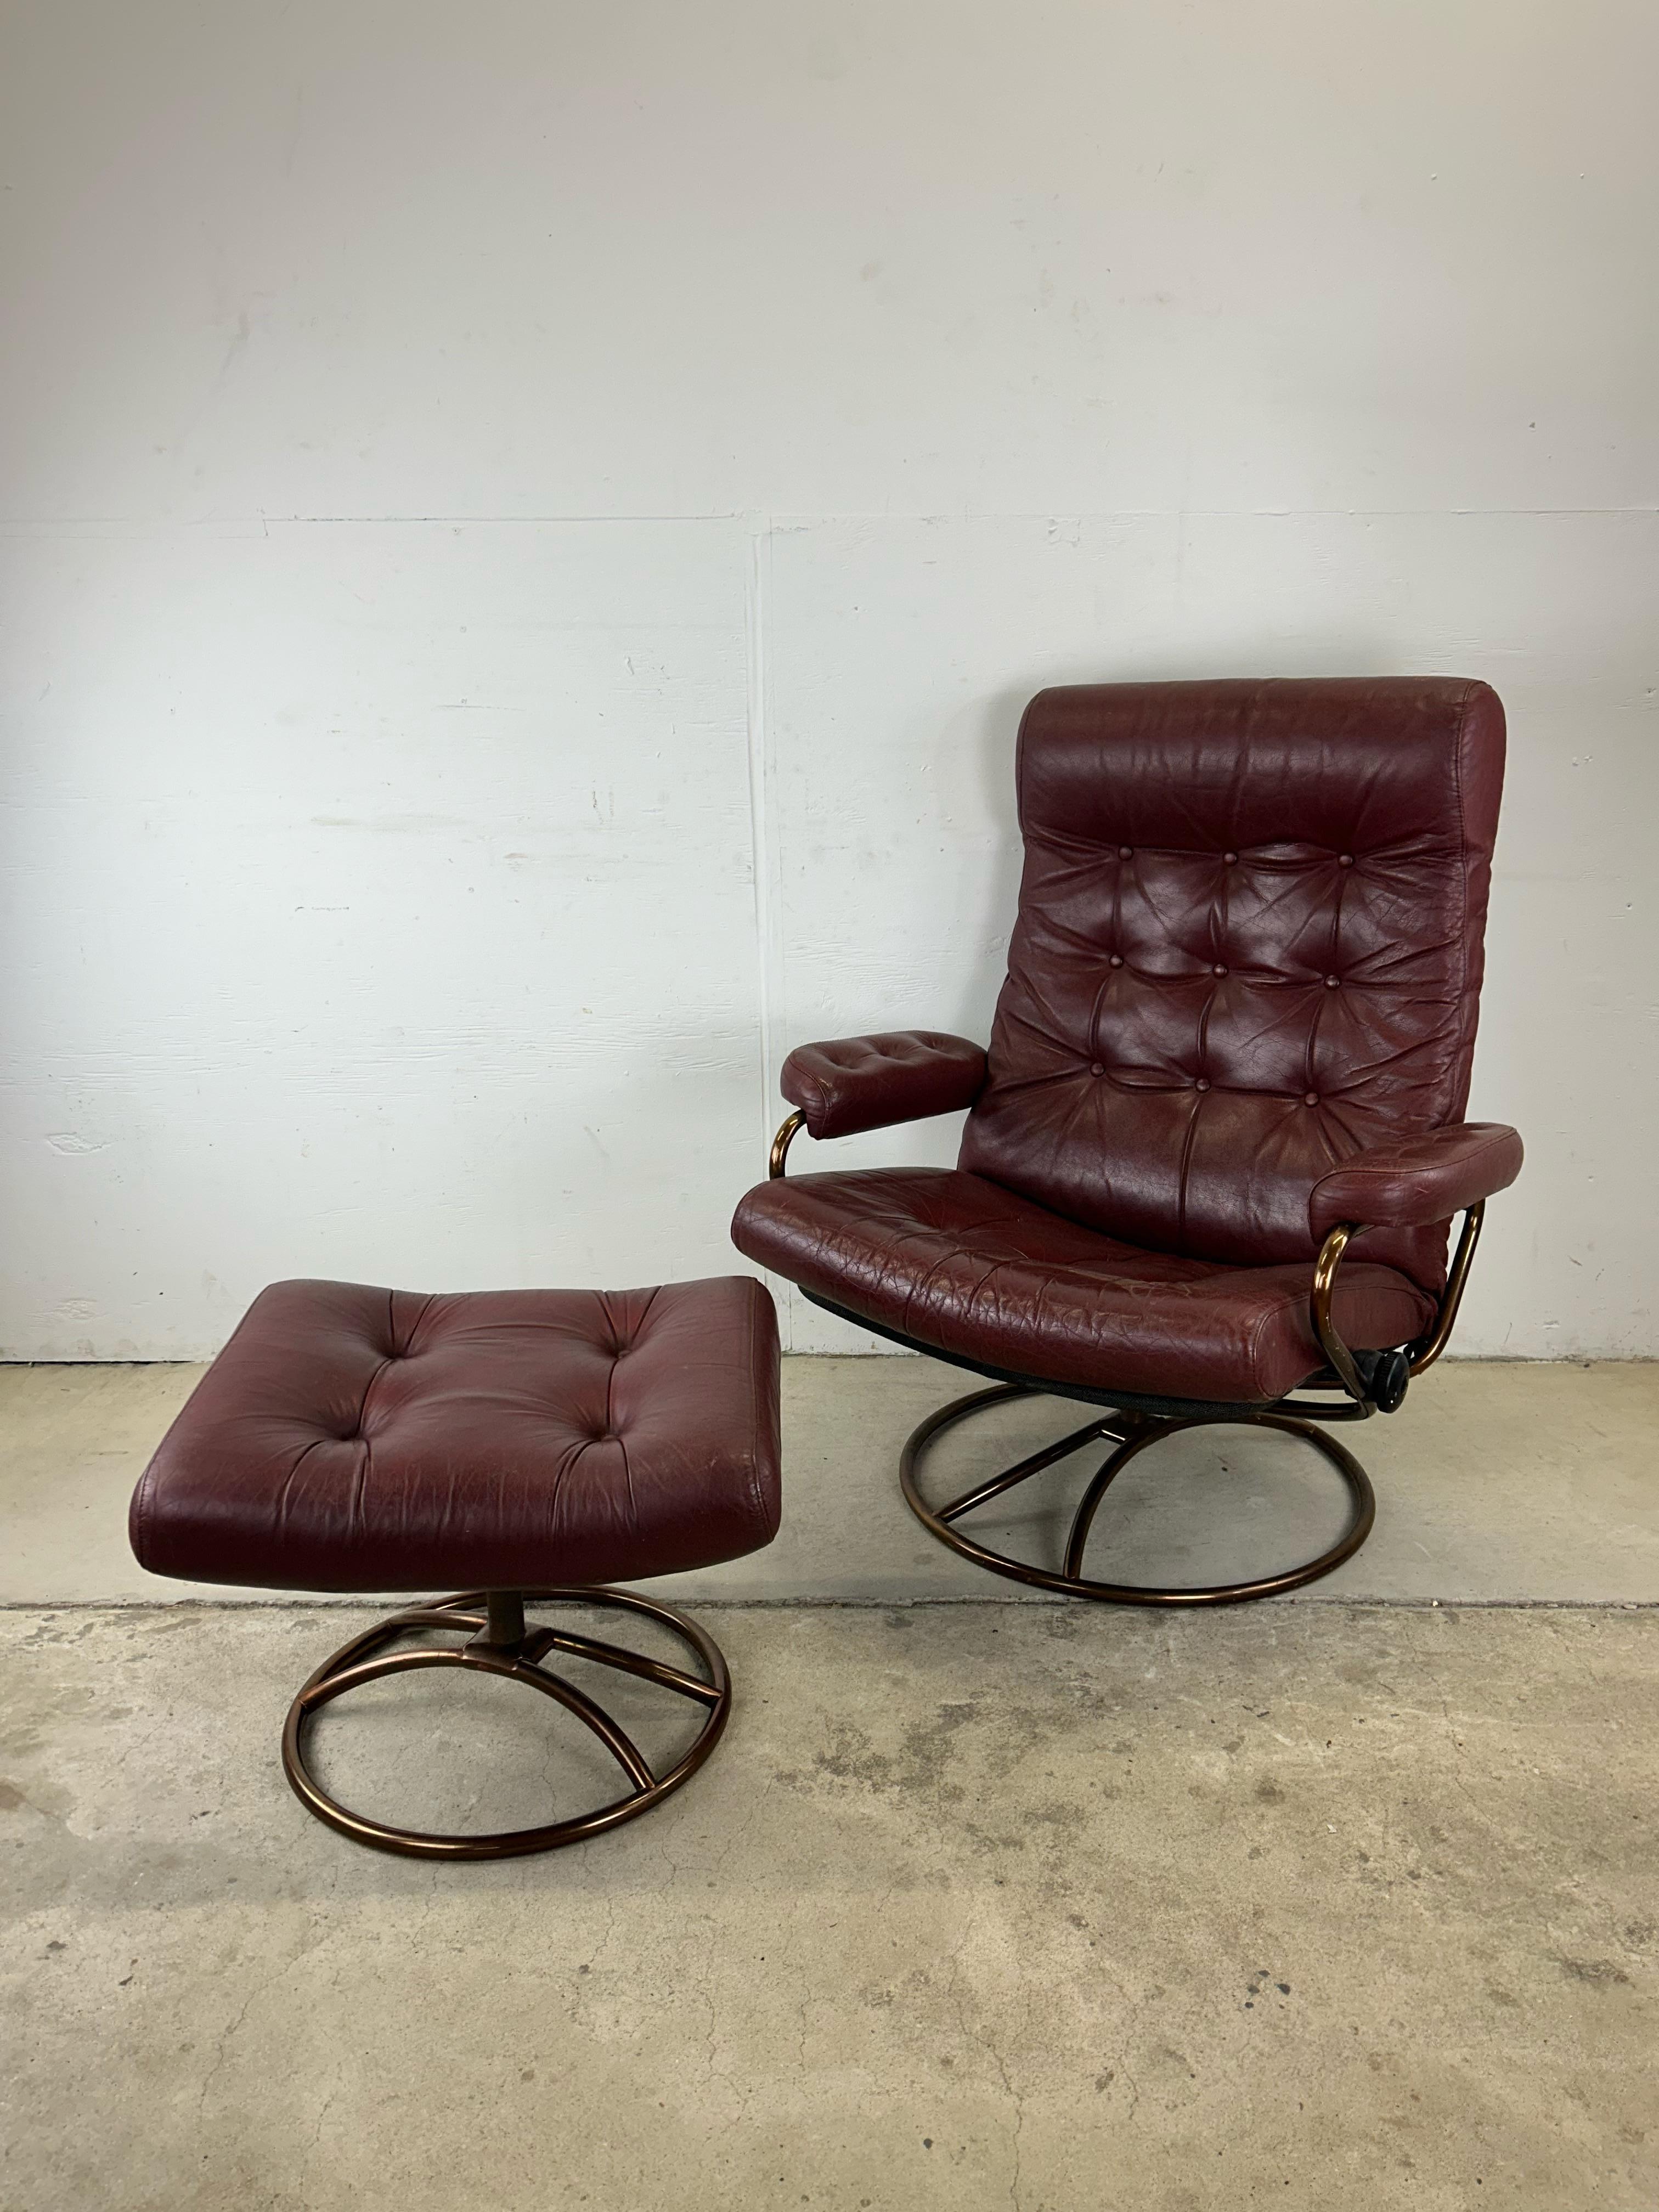 This mid century modern lounge chair by Ekornes ASA Stressless features beautiful red tufted leather seat and bronze tinted frame with swivel base.

Dimensions: 32.5w 28d 39.5h 17sh 21.5ah 
Ottoman: 21.5w 18d 15.5h 

Condition: Excellent vintage